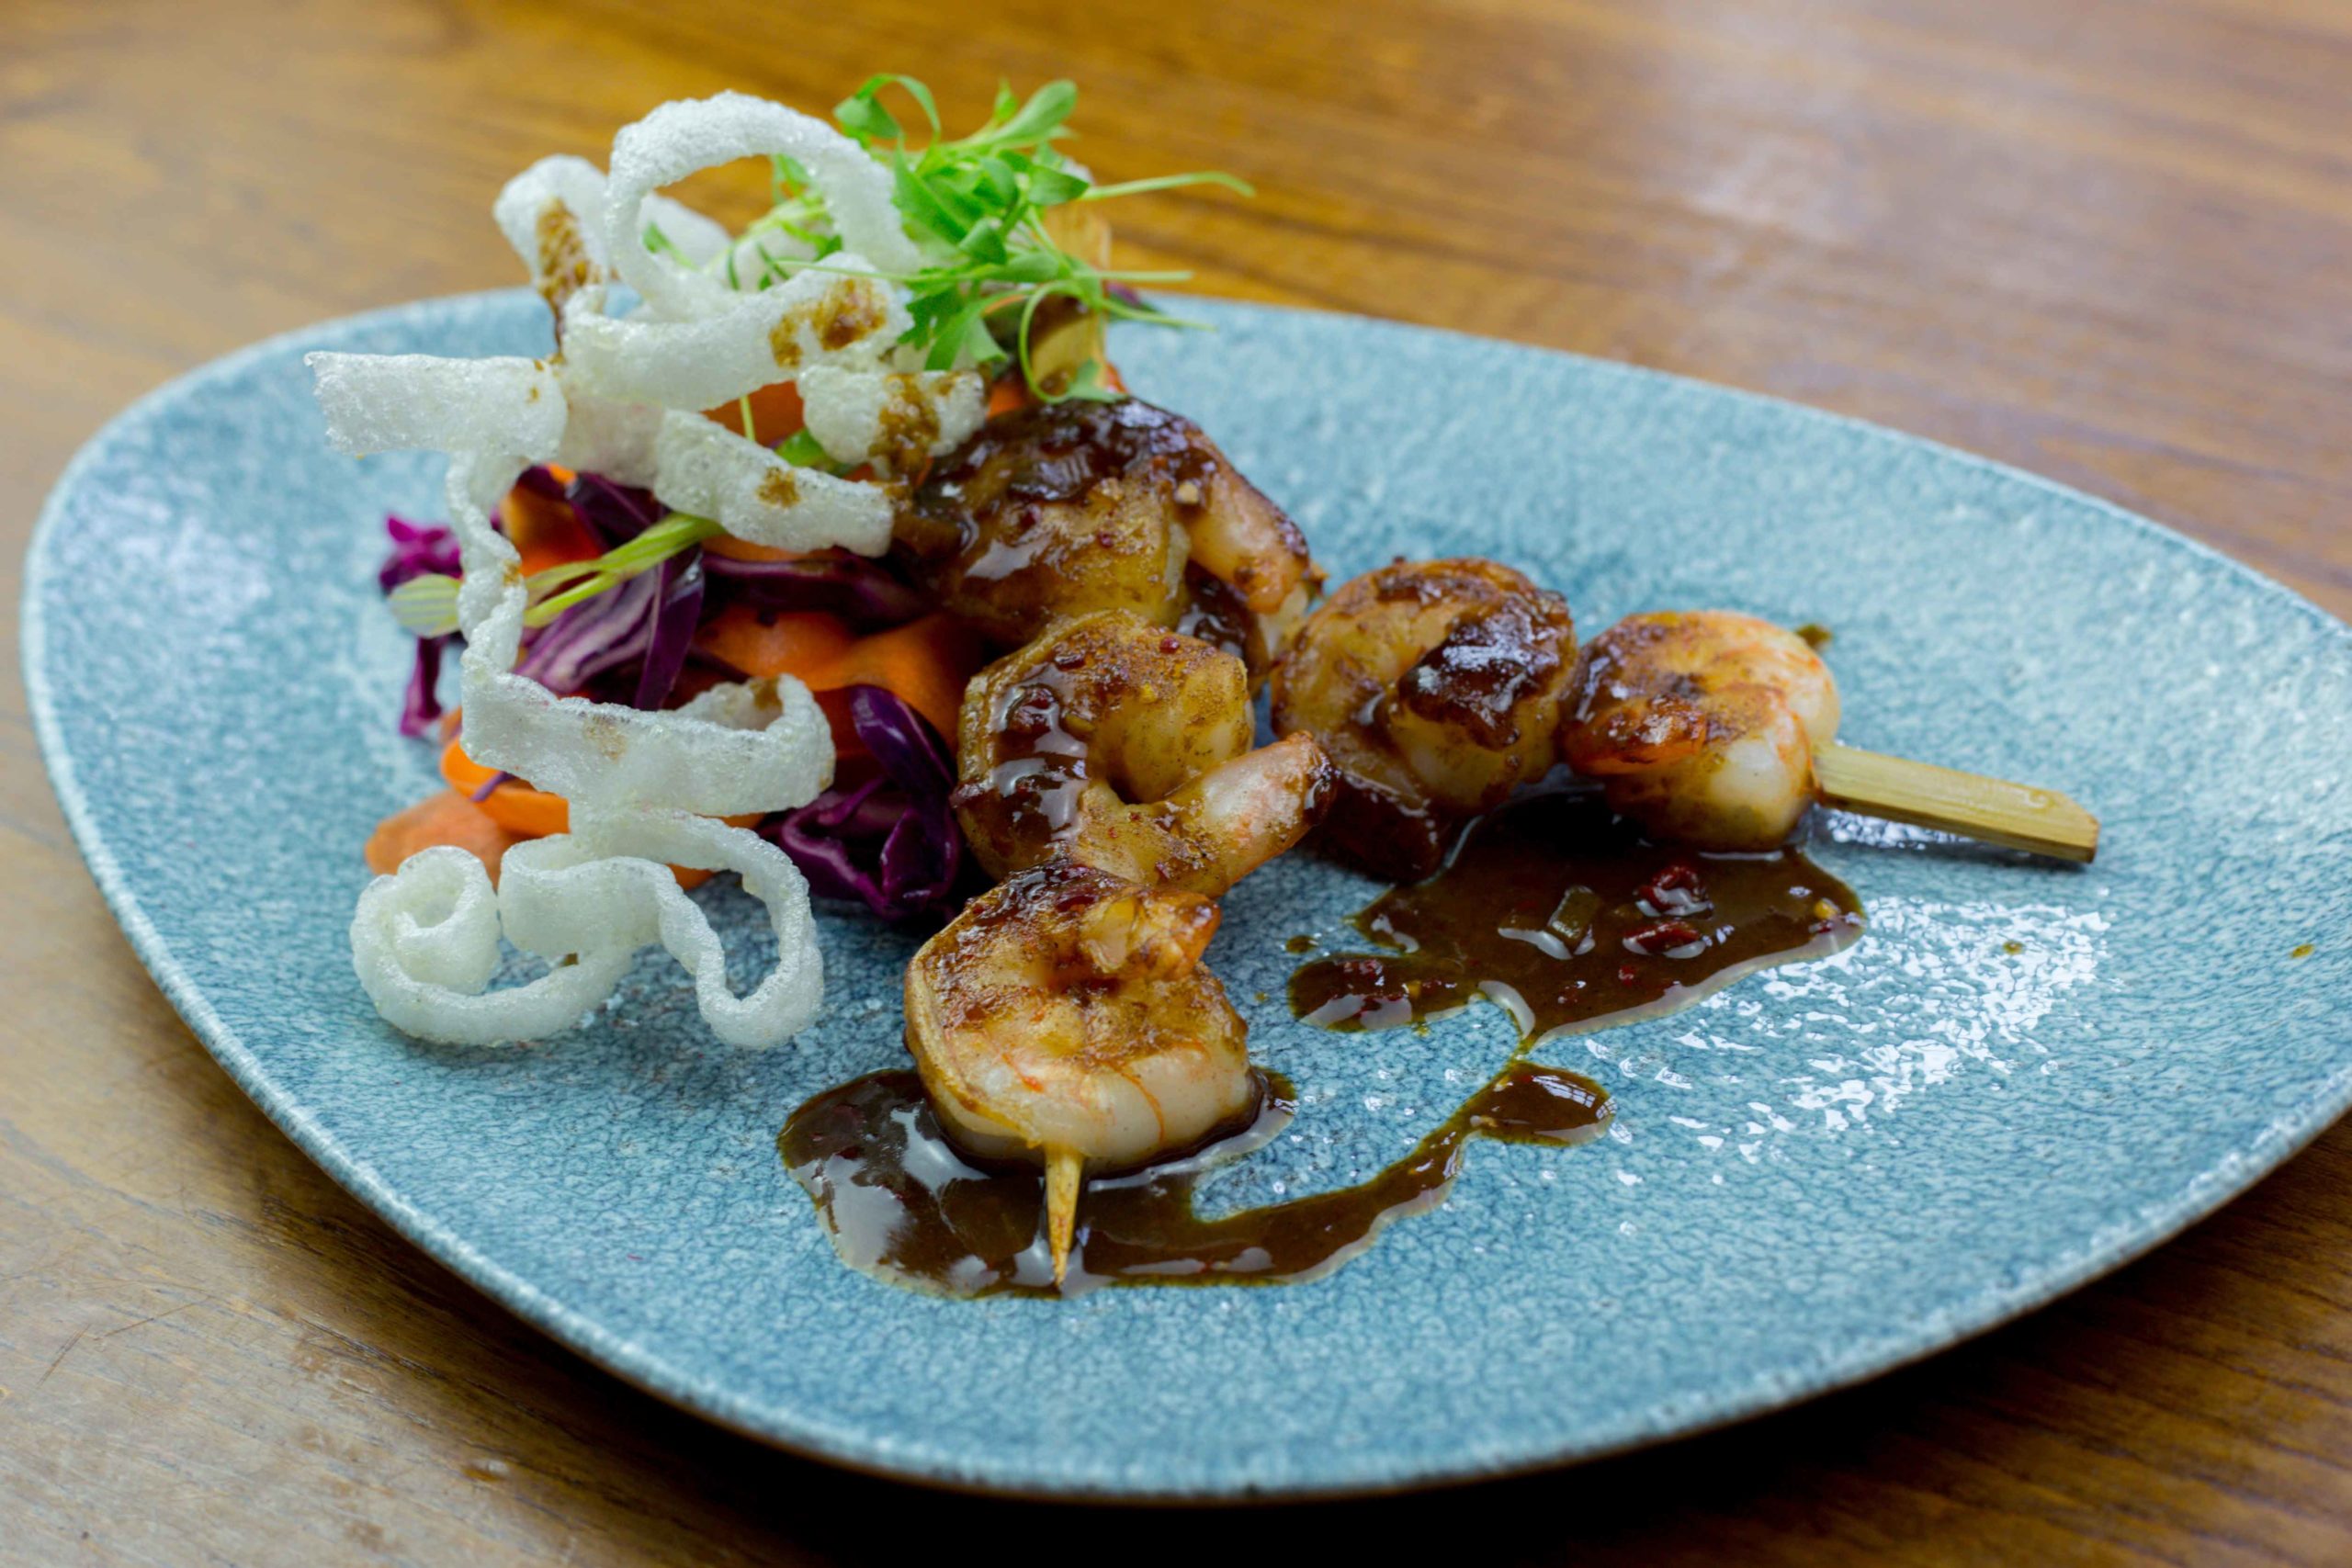 Prawn skewers with an asian slaw